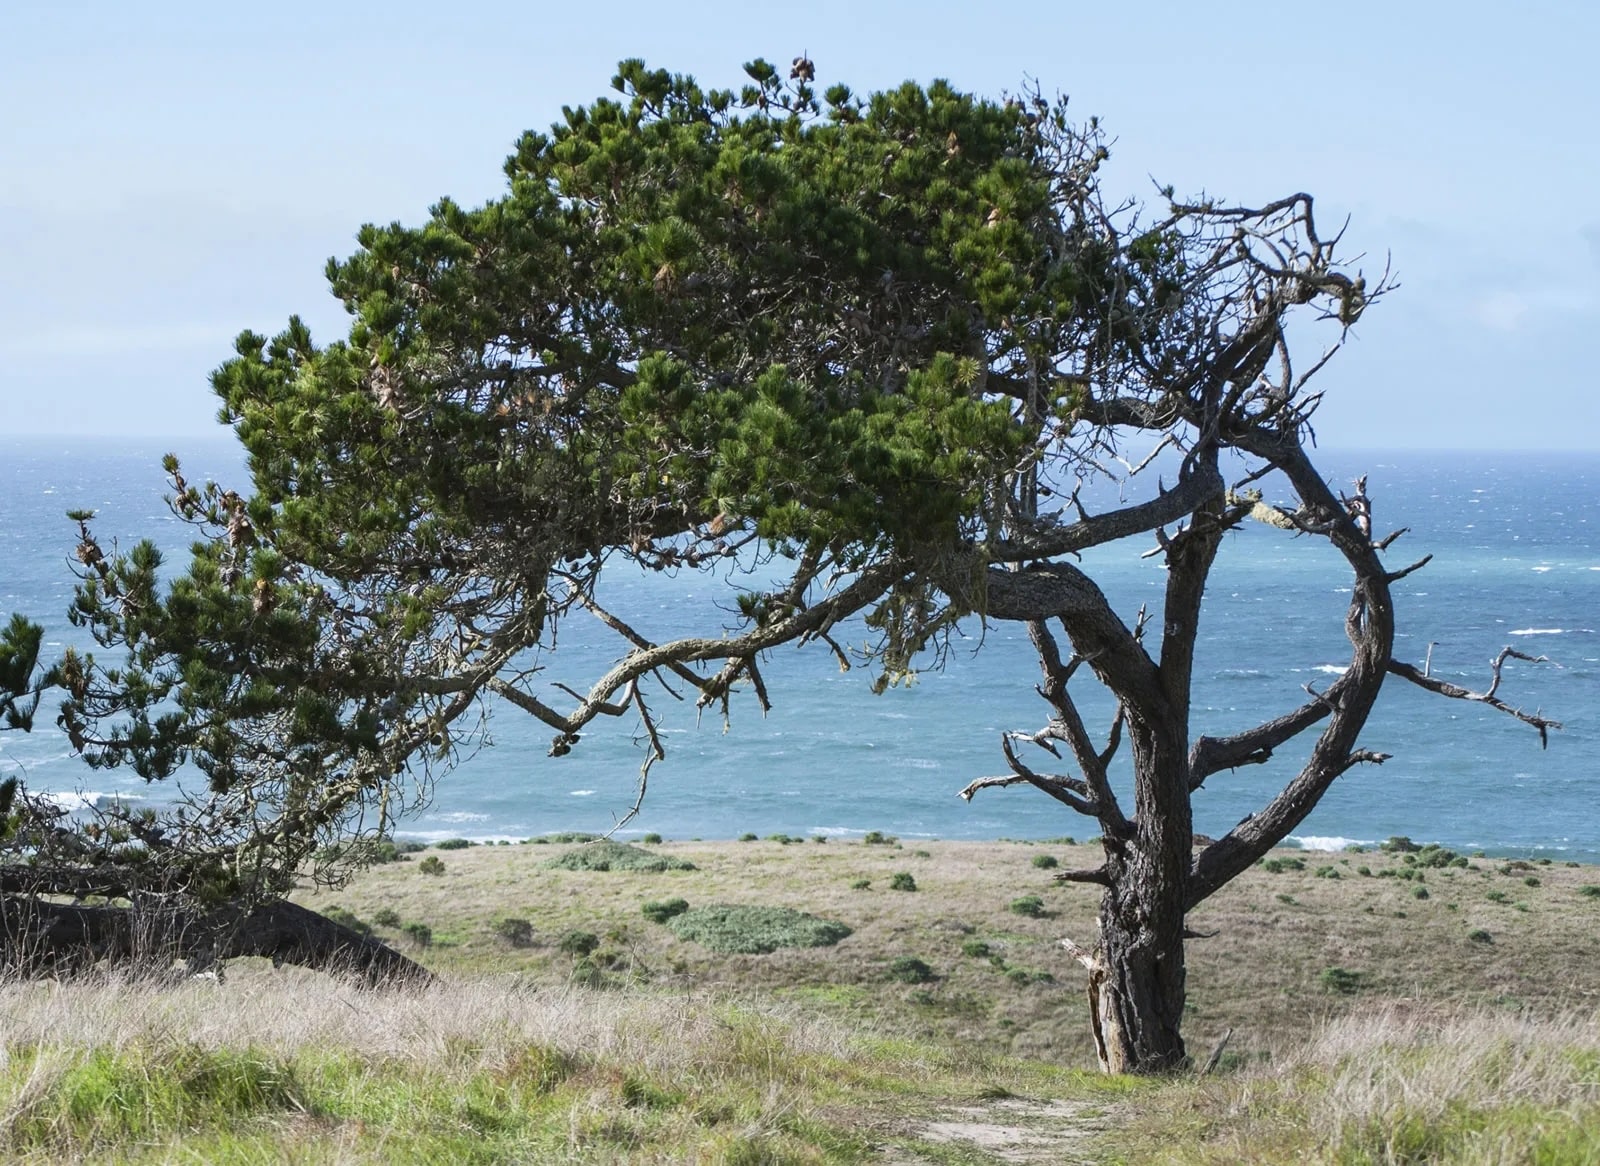 Monterey pine tree with twisted branches standing on a grassy hill overlooking the ocean under a clear blue sky.